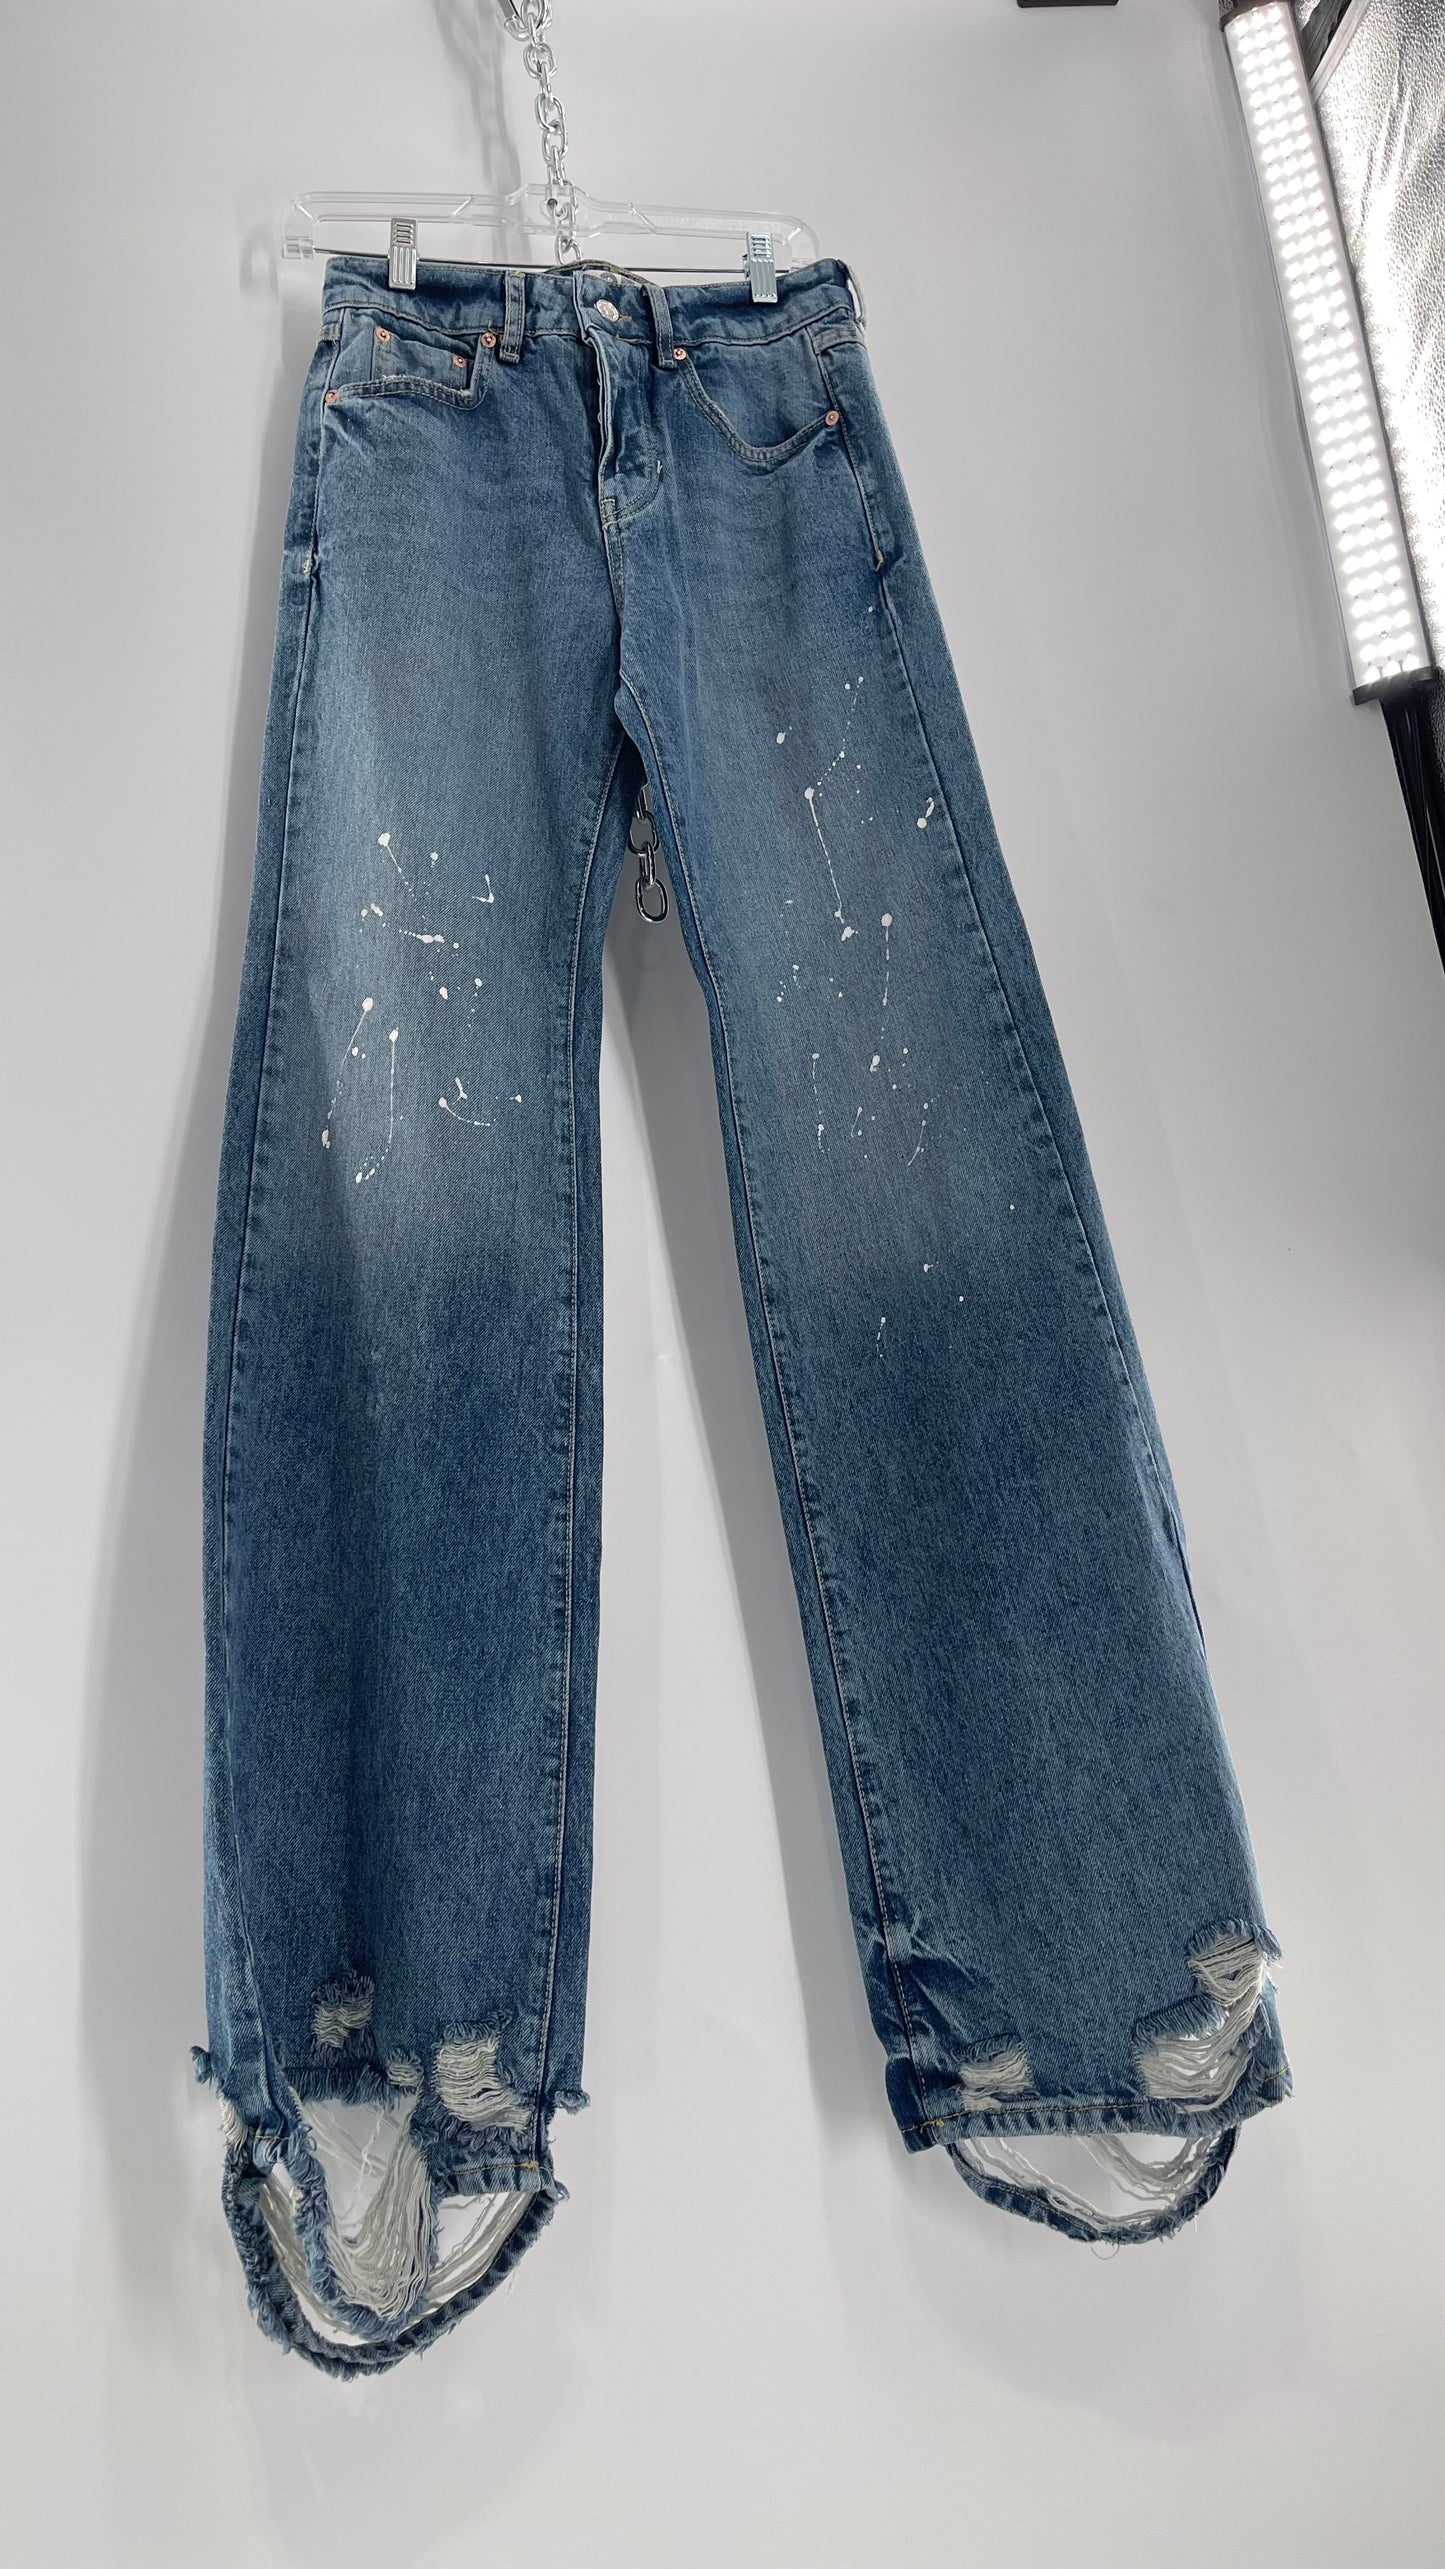 Free People Light Wash Straight Leg Jeans with Distressed Hem, Double Pockets and White Paint with Tags Attached (25)